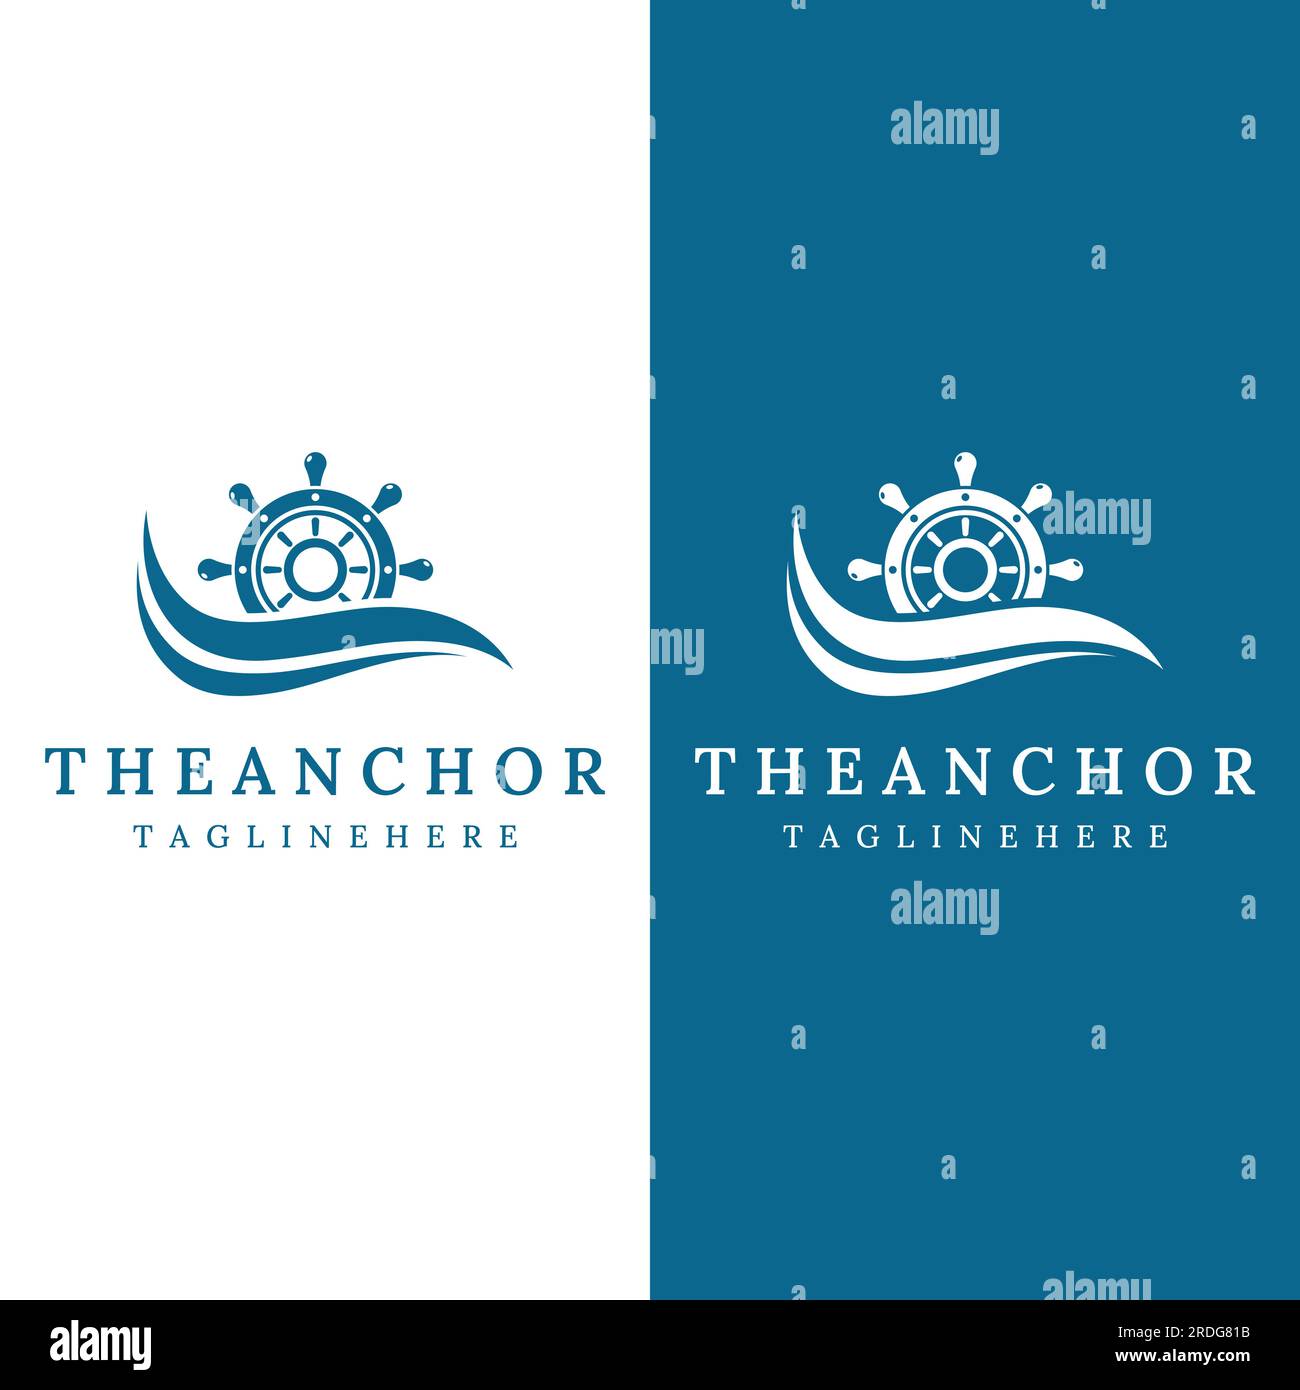 Anchor Vector Art, Icons, and Graphics for Free Download